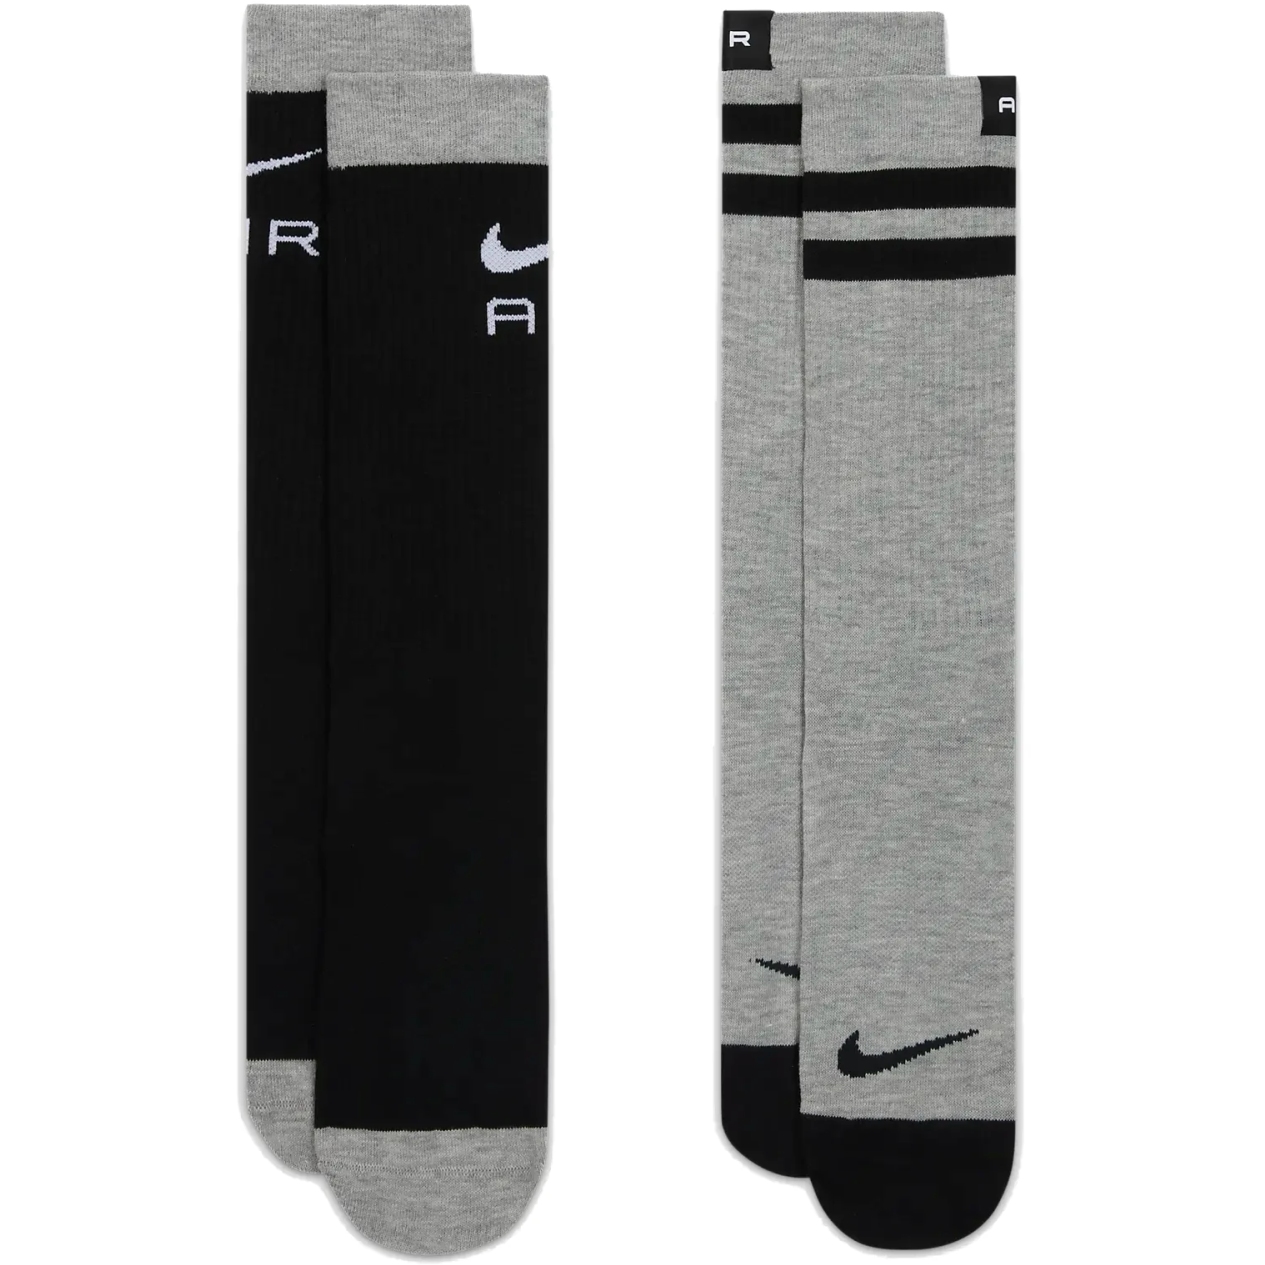 Picture of Nike Everyday Essential Crew Socks - 2 Pair - multi-color FN3149-900